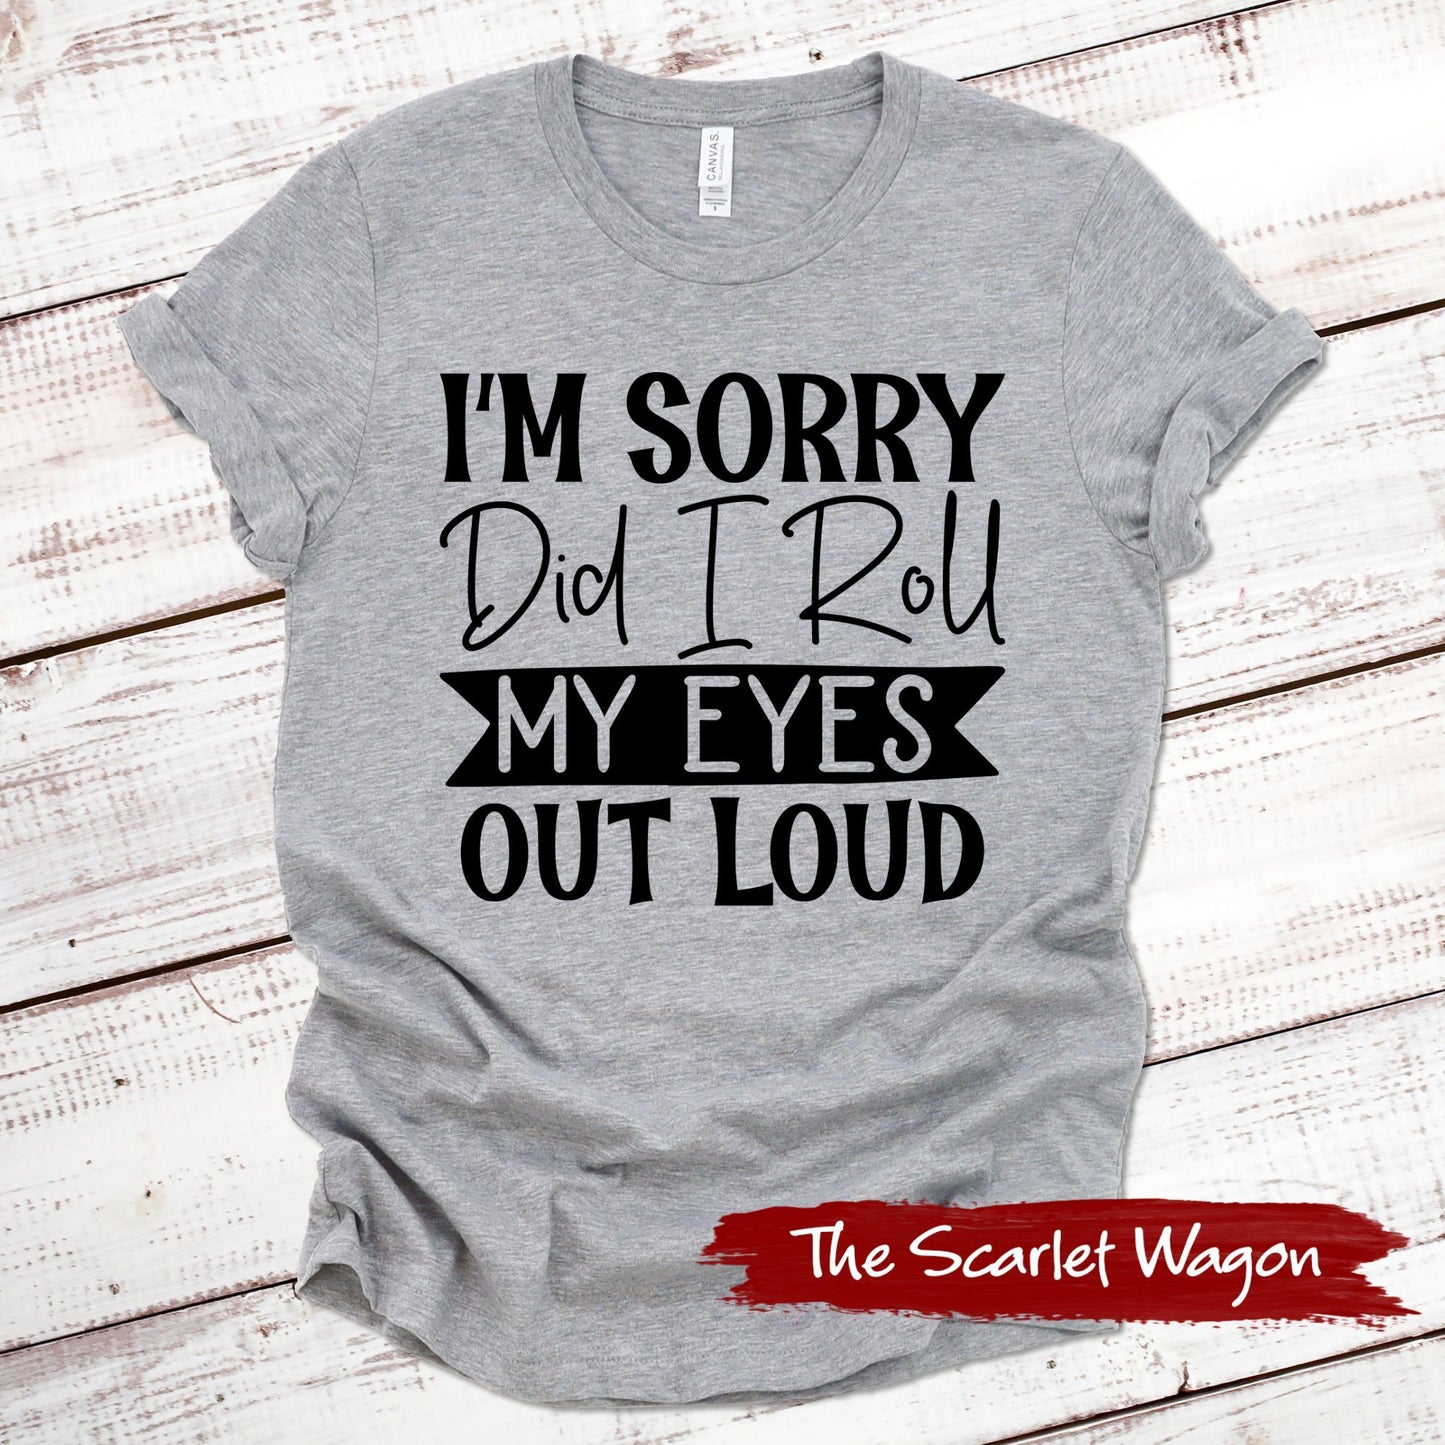 I'm Sorry Did I Roll My Eyes Out Loud Funny Shirt Scarlet Wagon Athletic Heather XS 